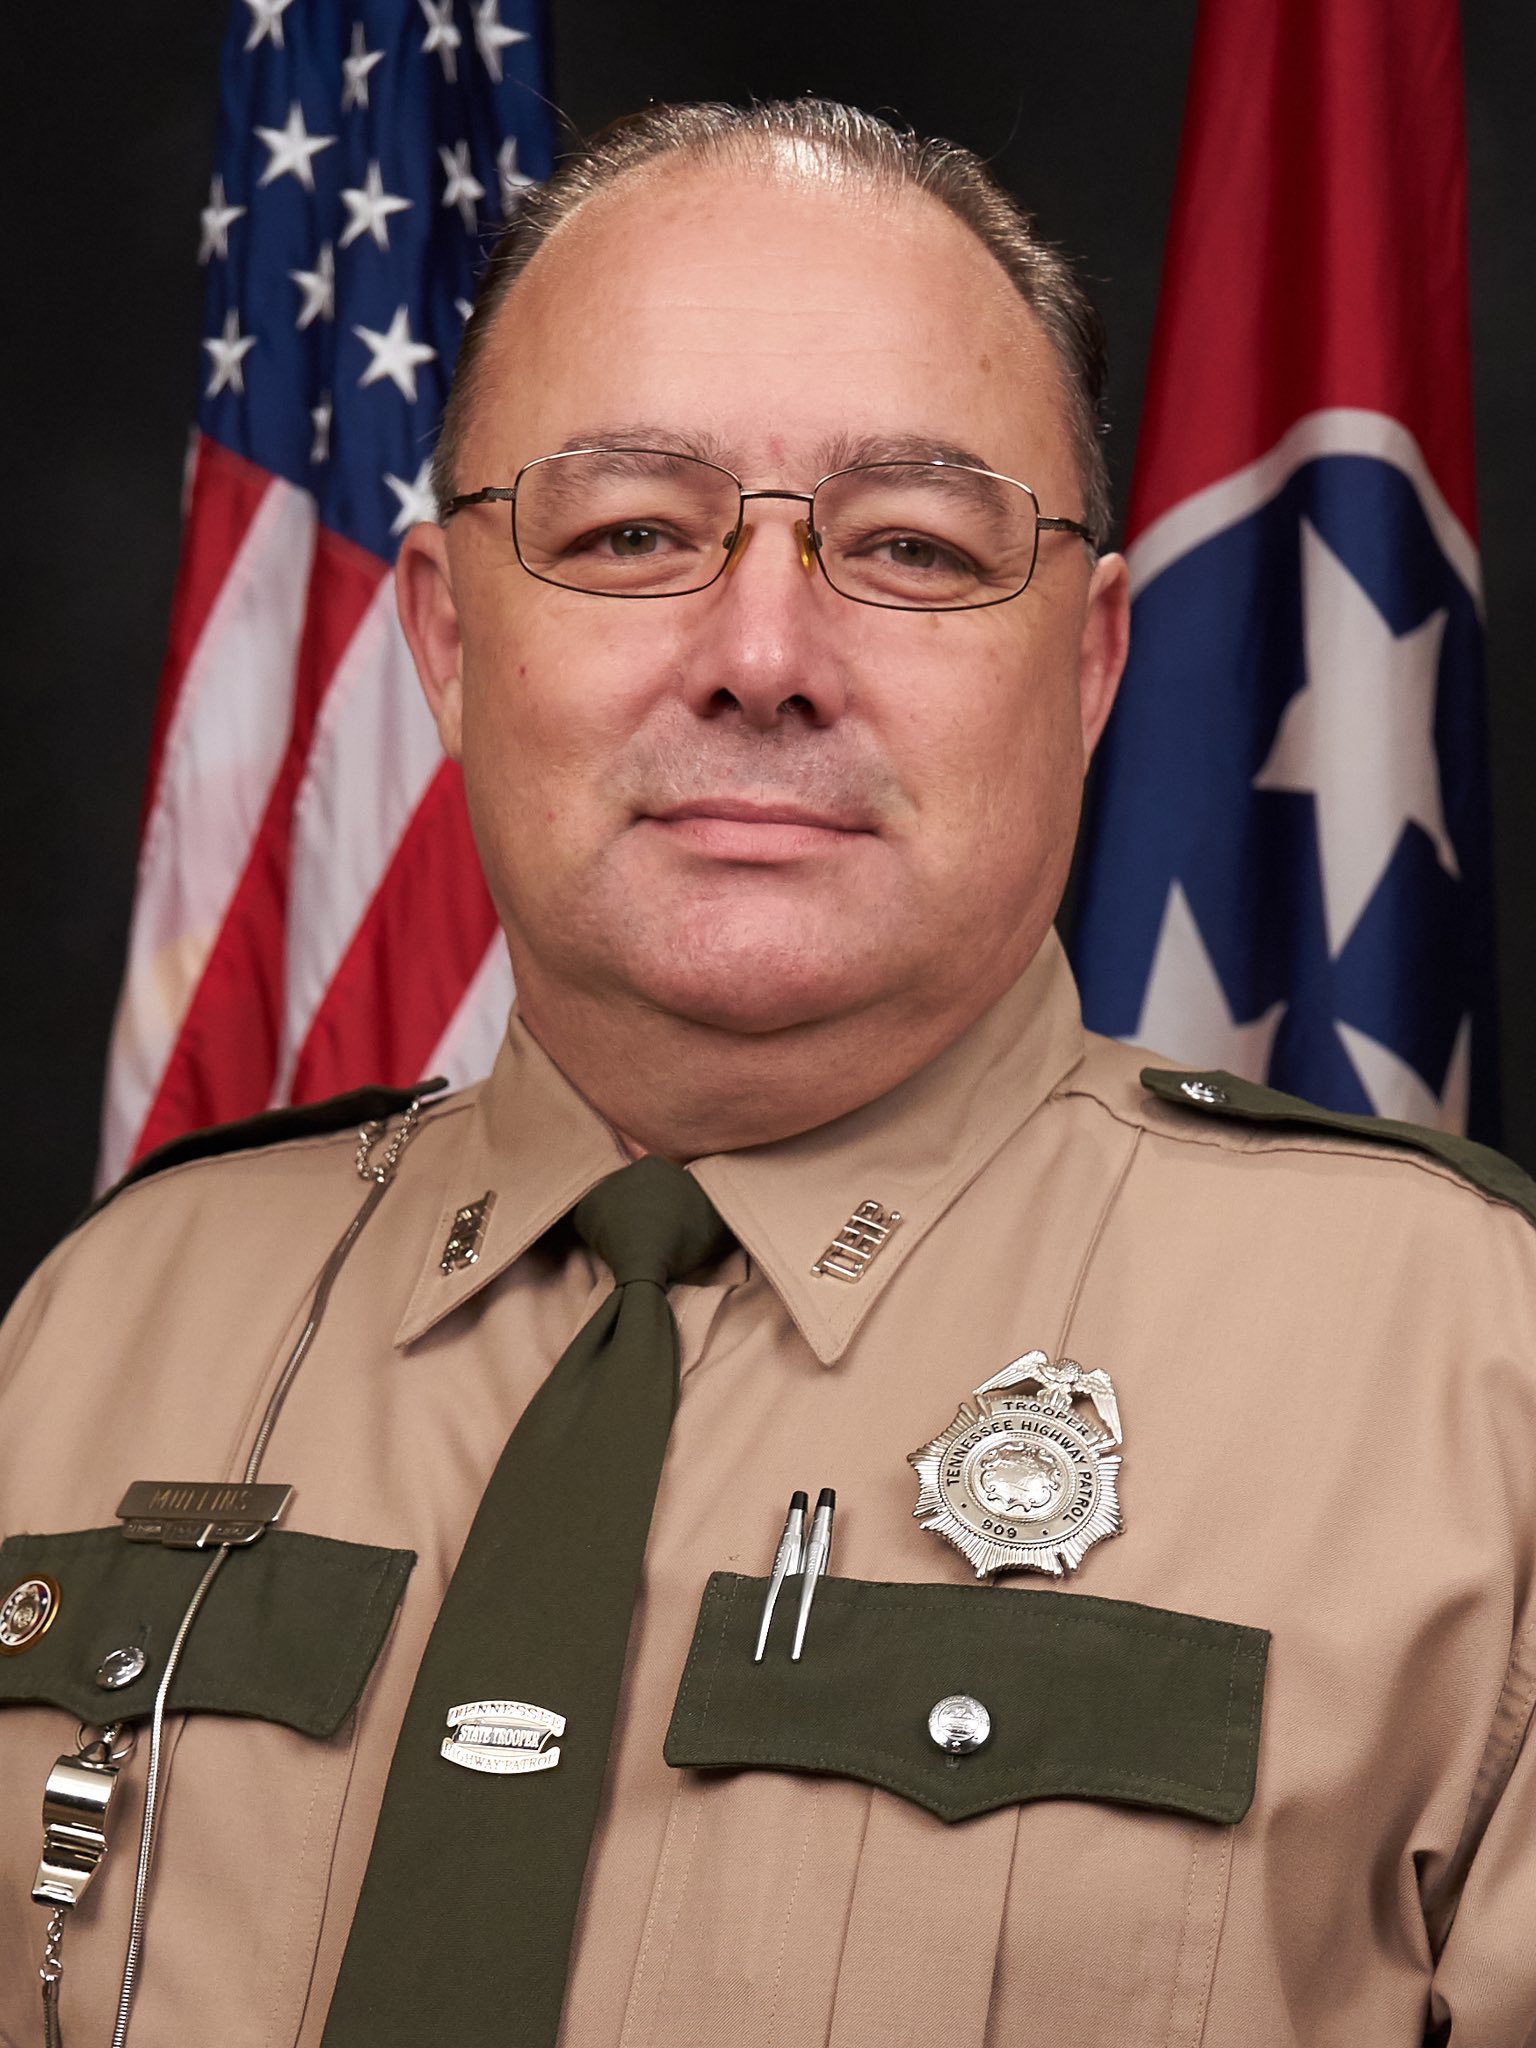 Master Trooper Vince A. Mullins | Tennessee Highway Patrol, Tennessee